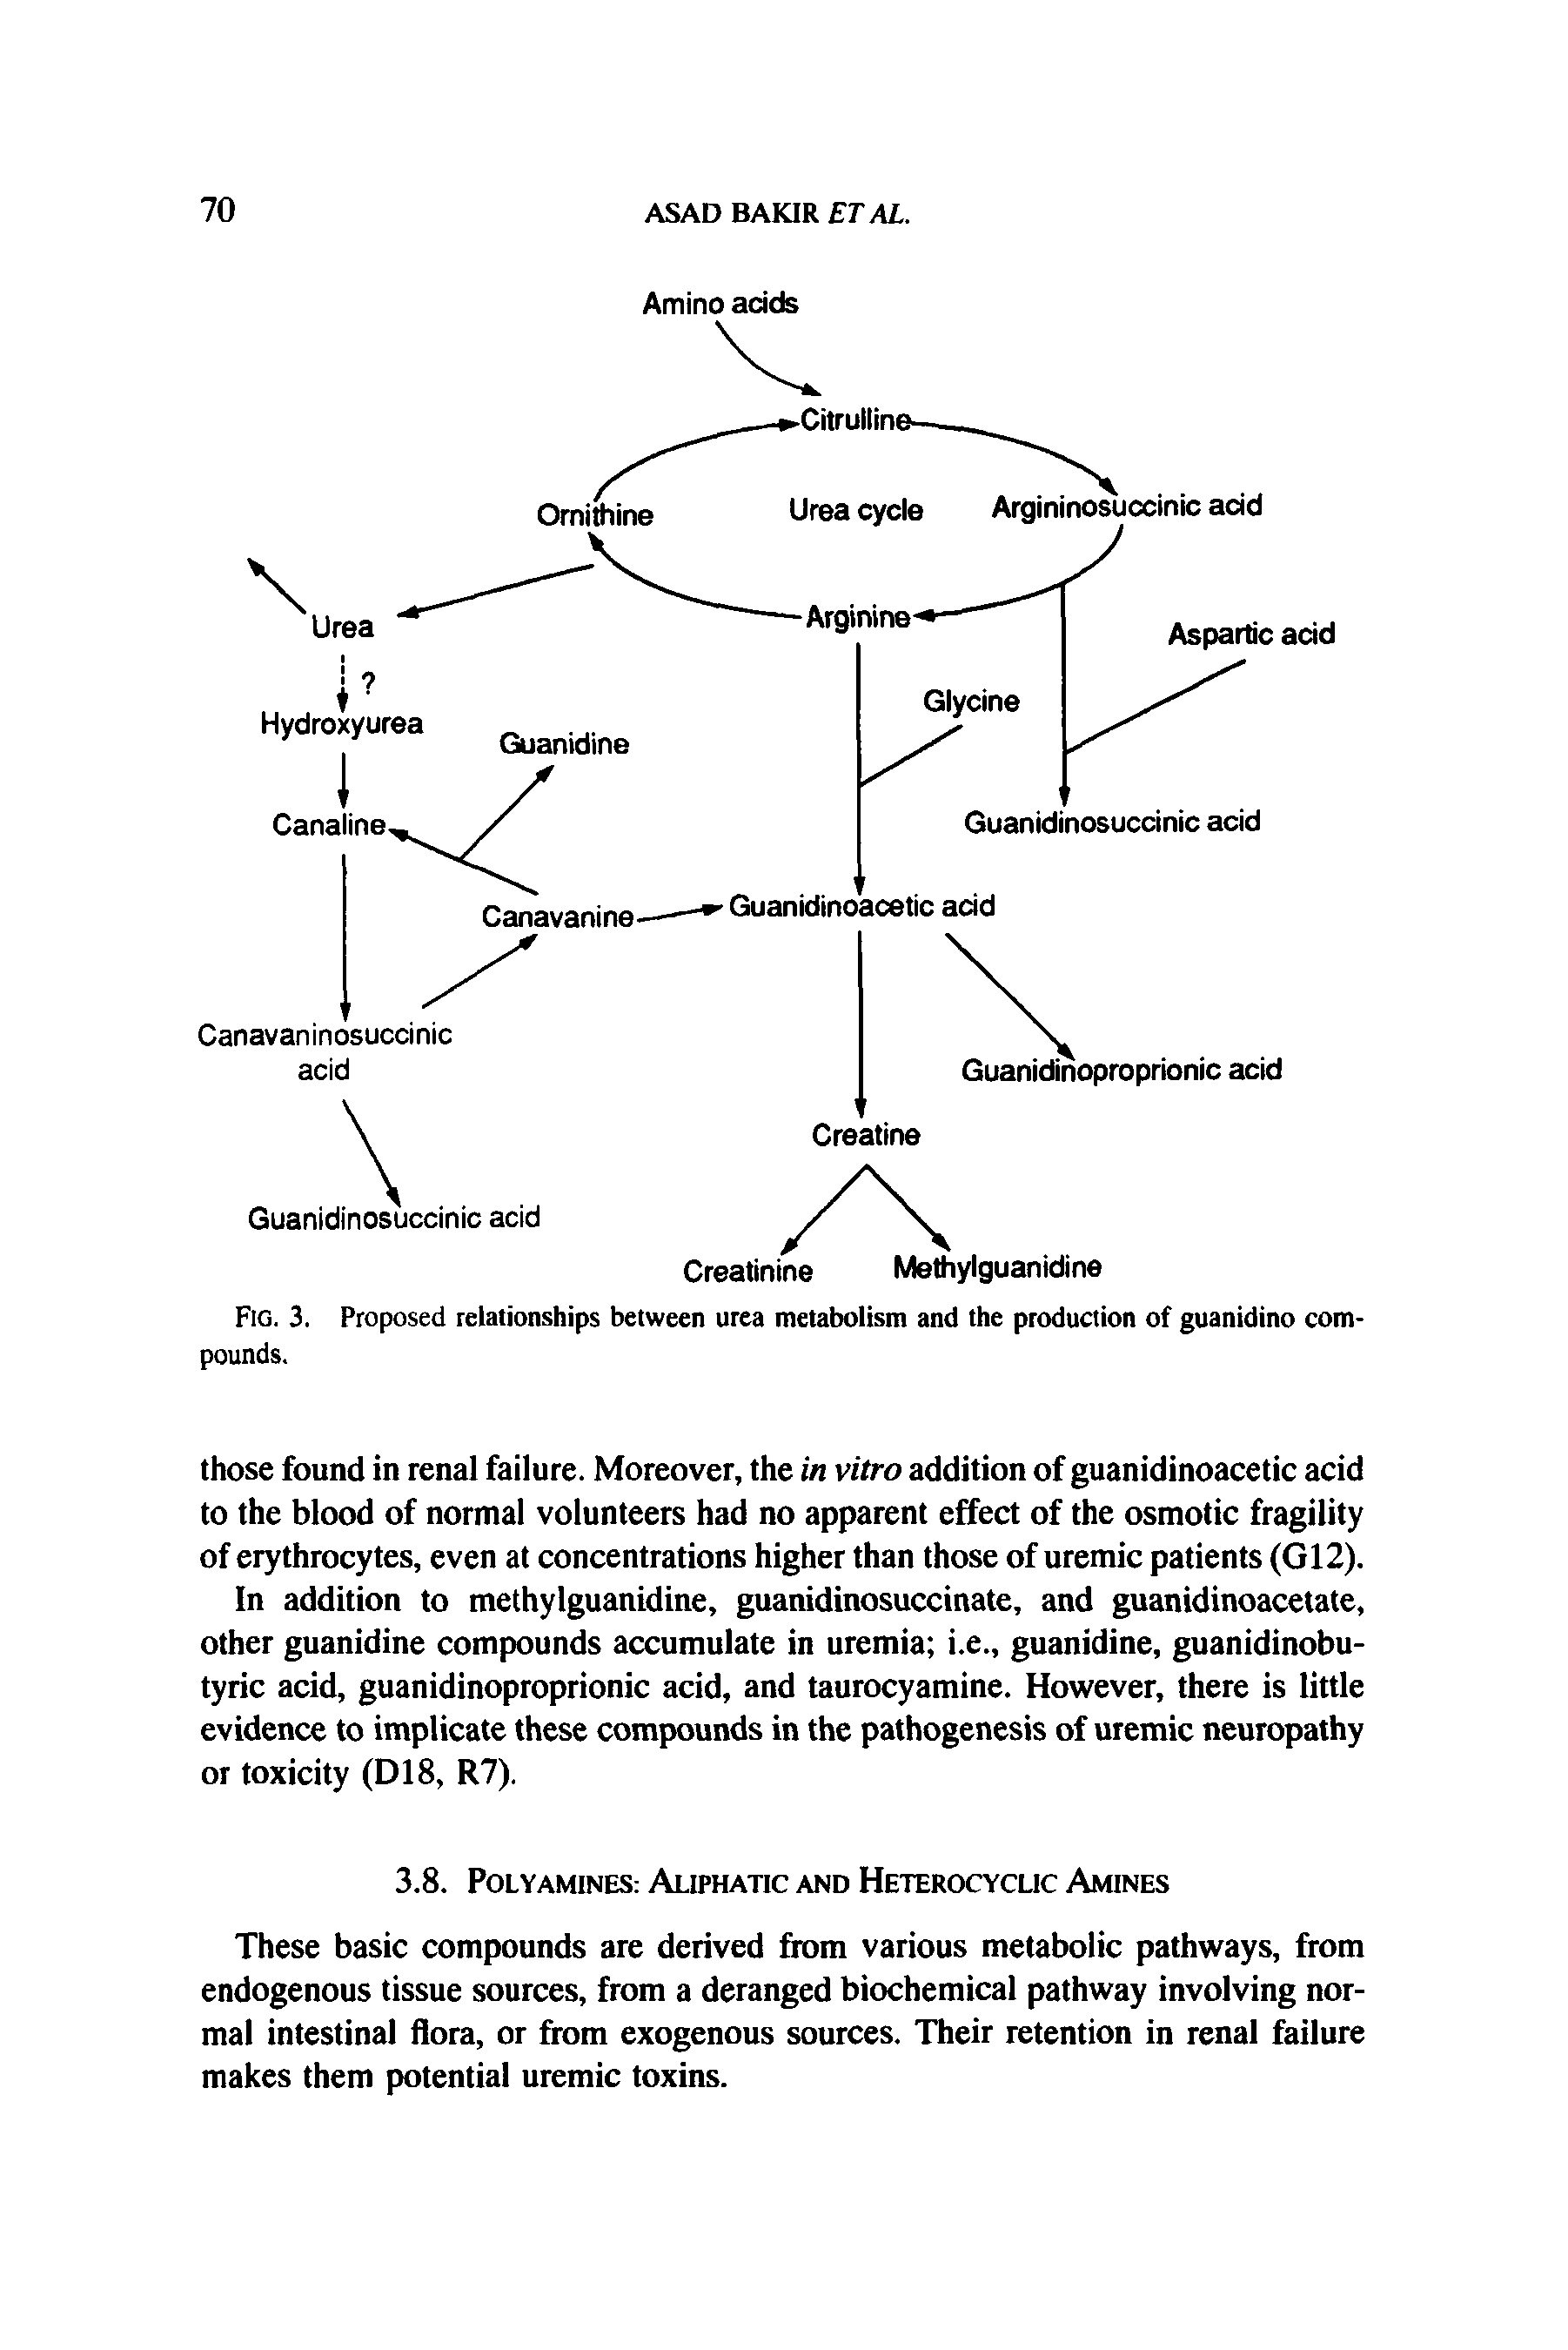 Fig. 3. Proposed relationships between urea metabolism and the production of guanidino compounds.